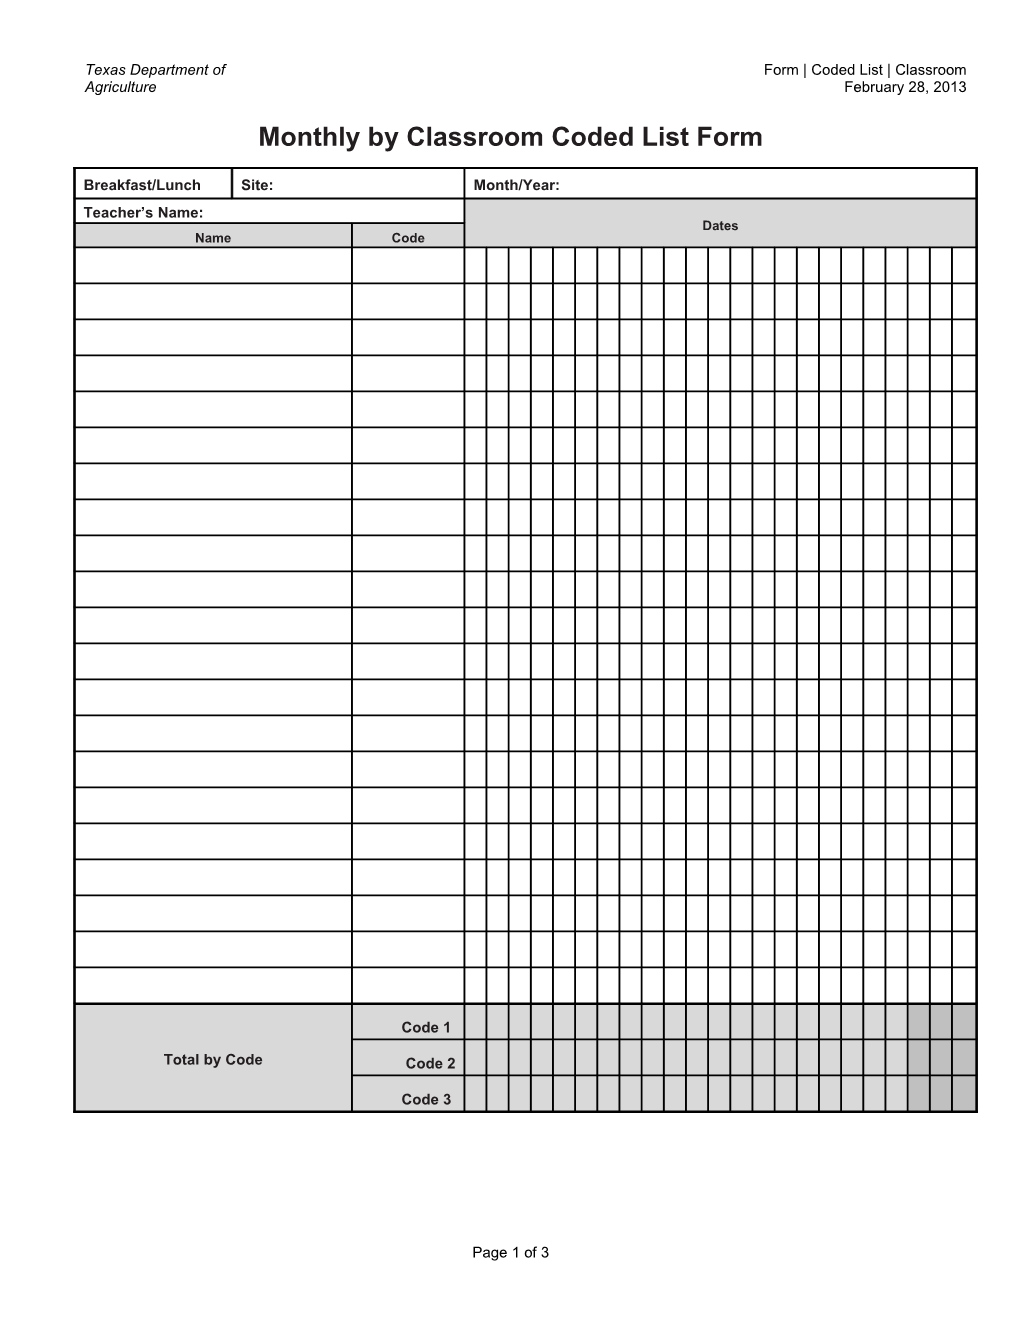 Monthly by Classroom Coded List Form